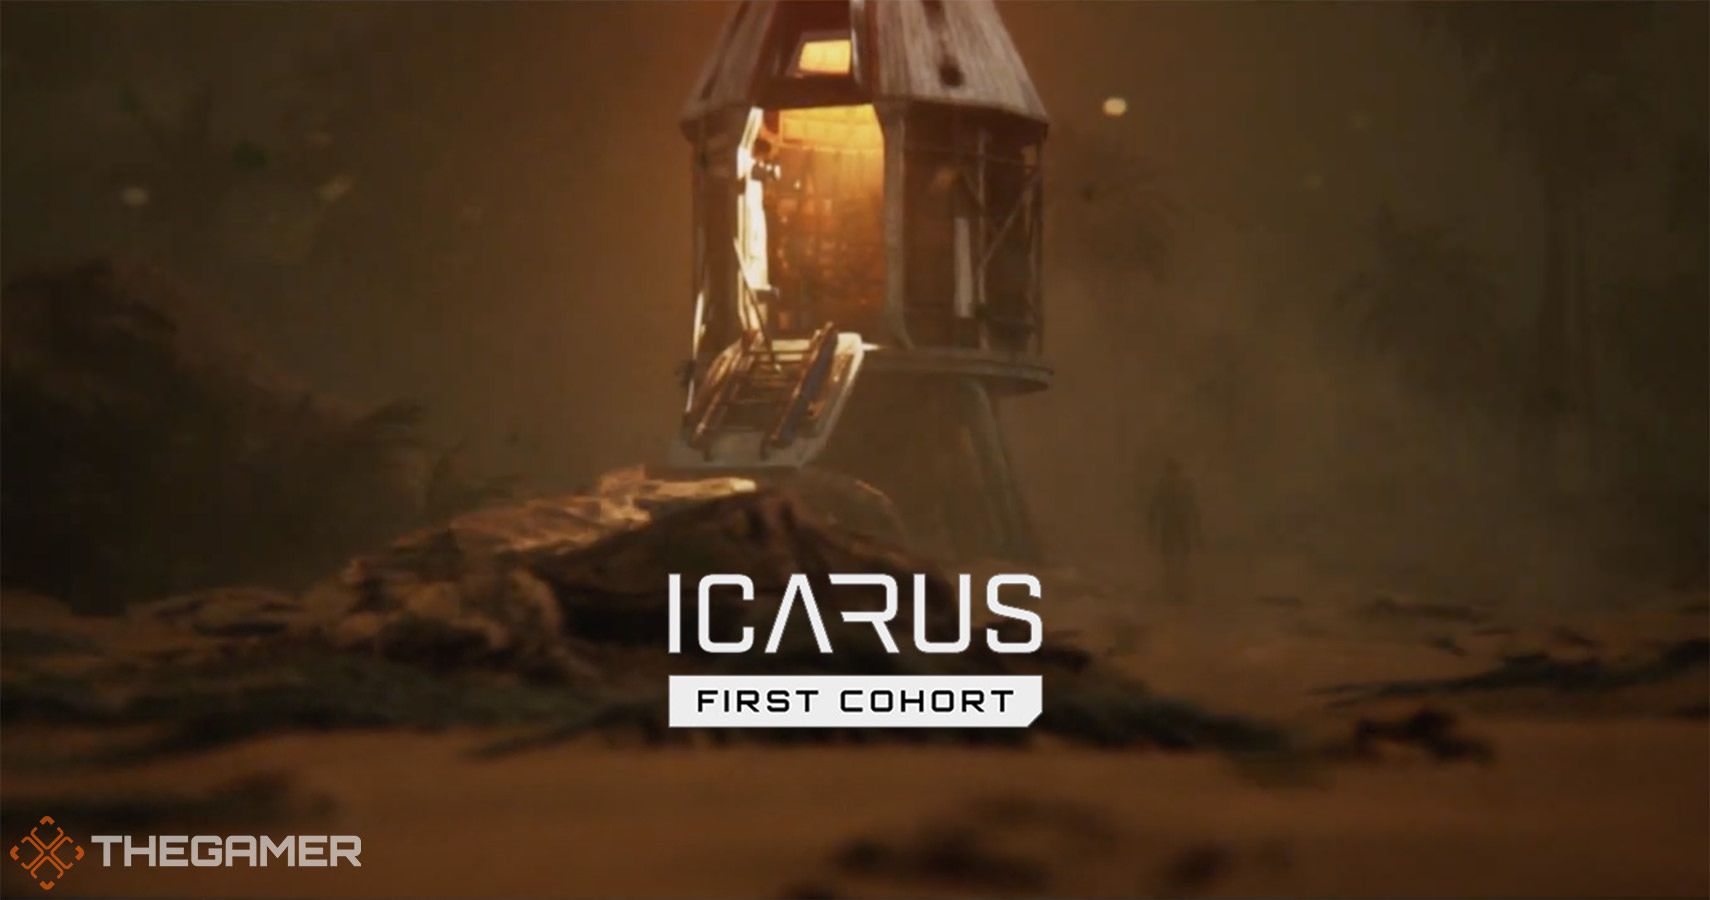 Heres Your First Look At Icarus The New Space Survival Game From The Creator Of DayZ